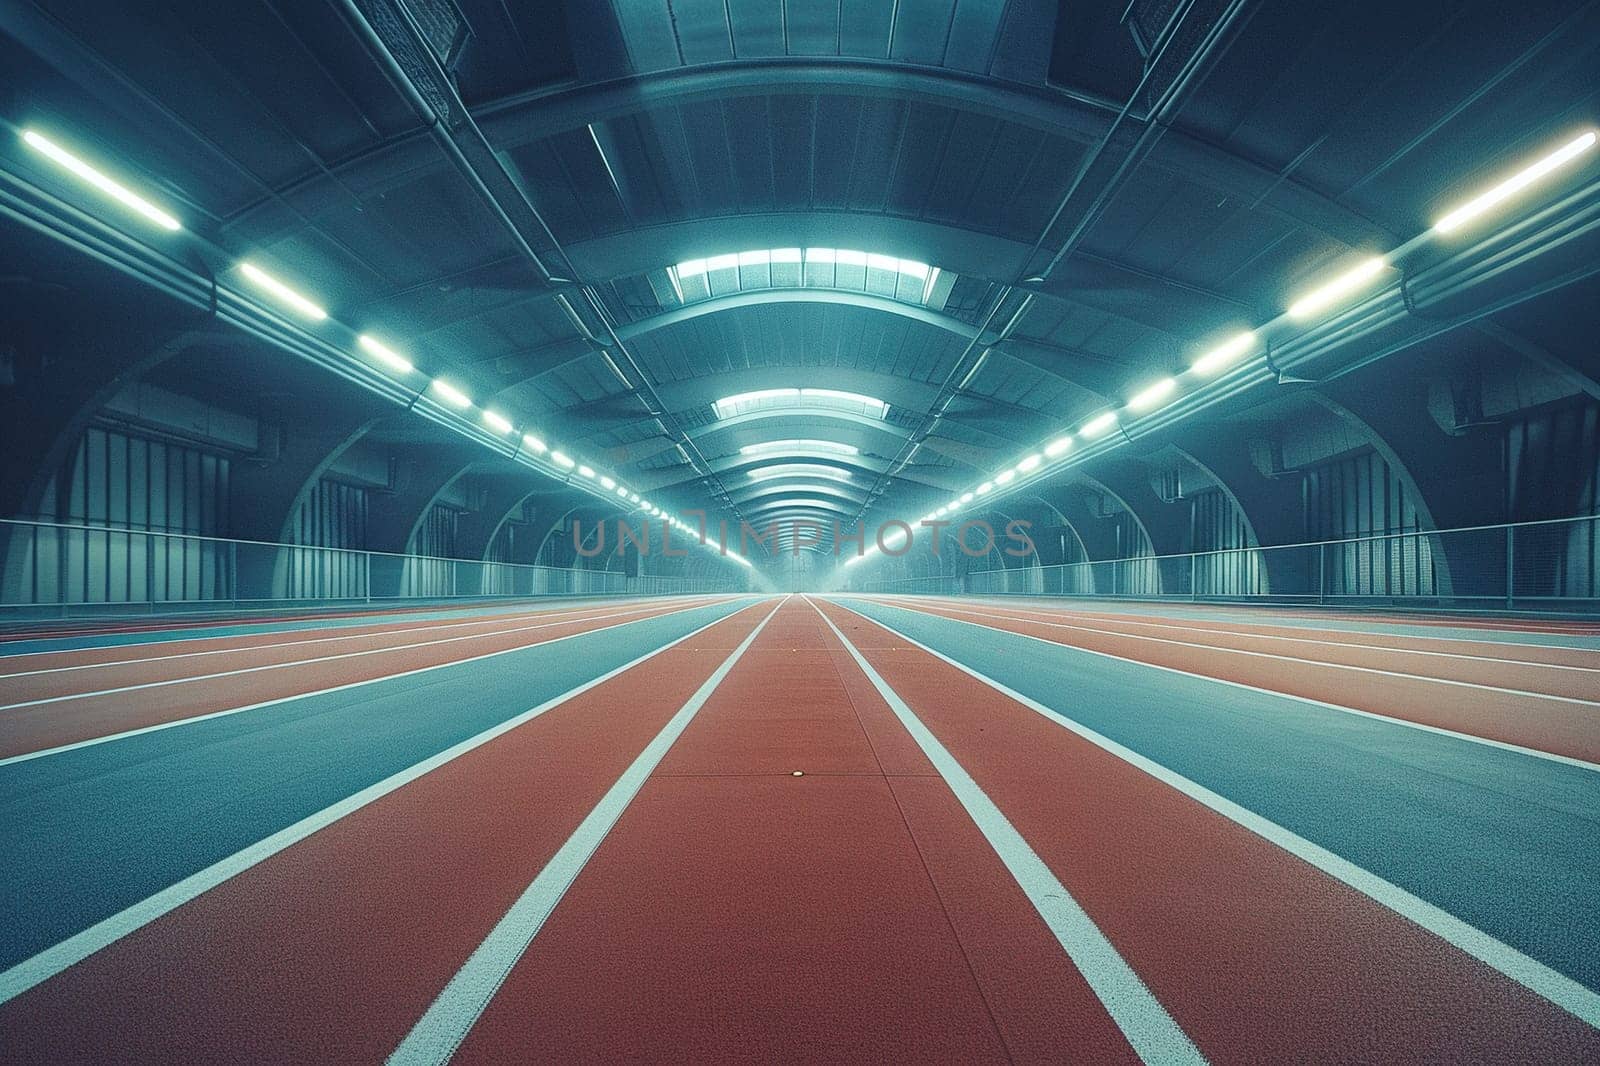 Empty running tracks in a large sports stadium illuminated by floodlights. Generated by artificial intelligence by Vovmar